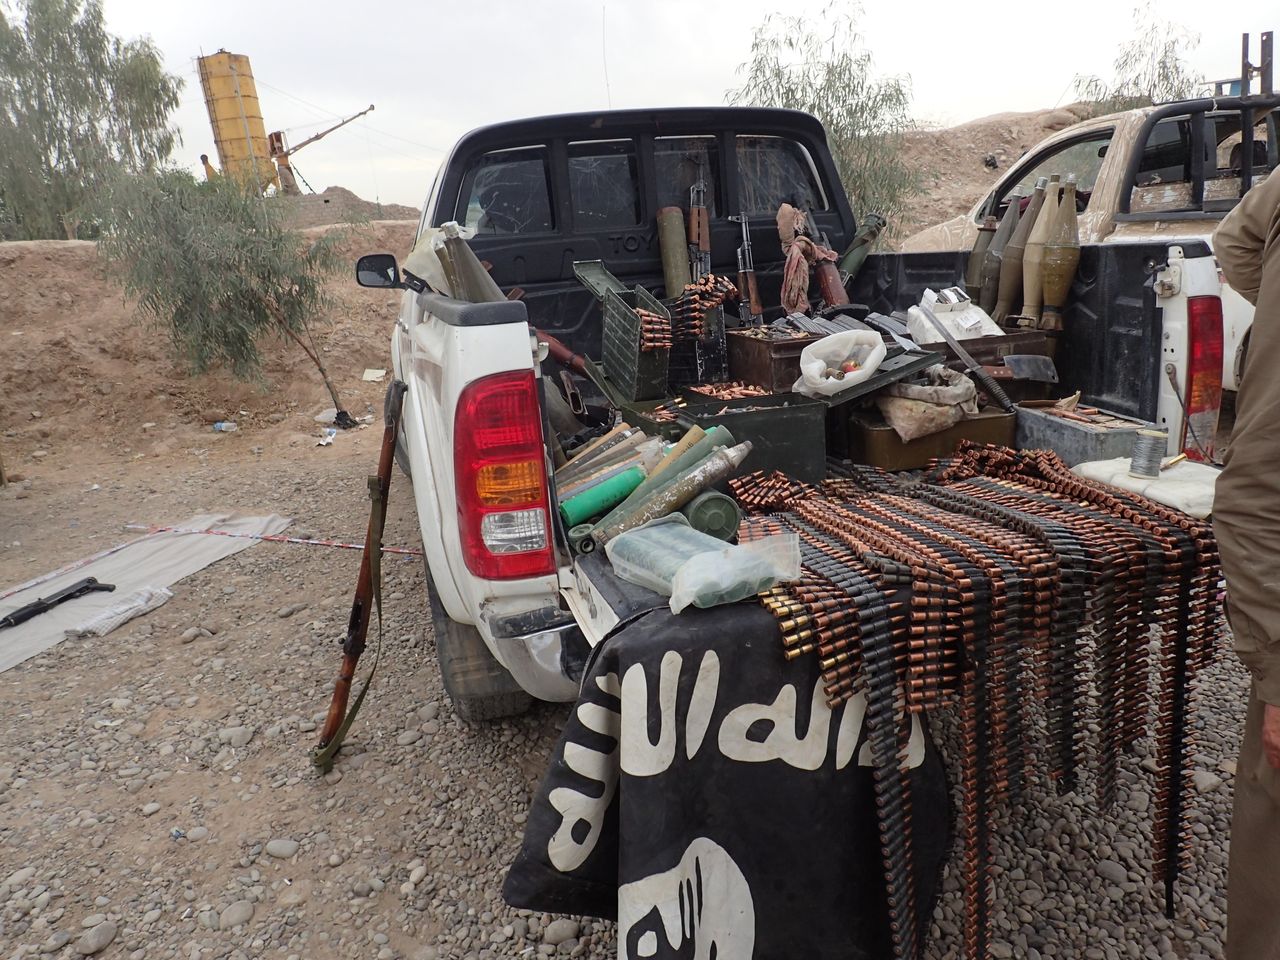 An Islamic State vehicle recovered with ammunition and guns.